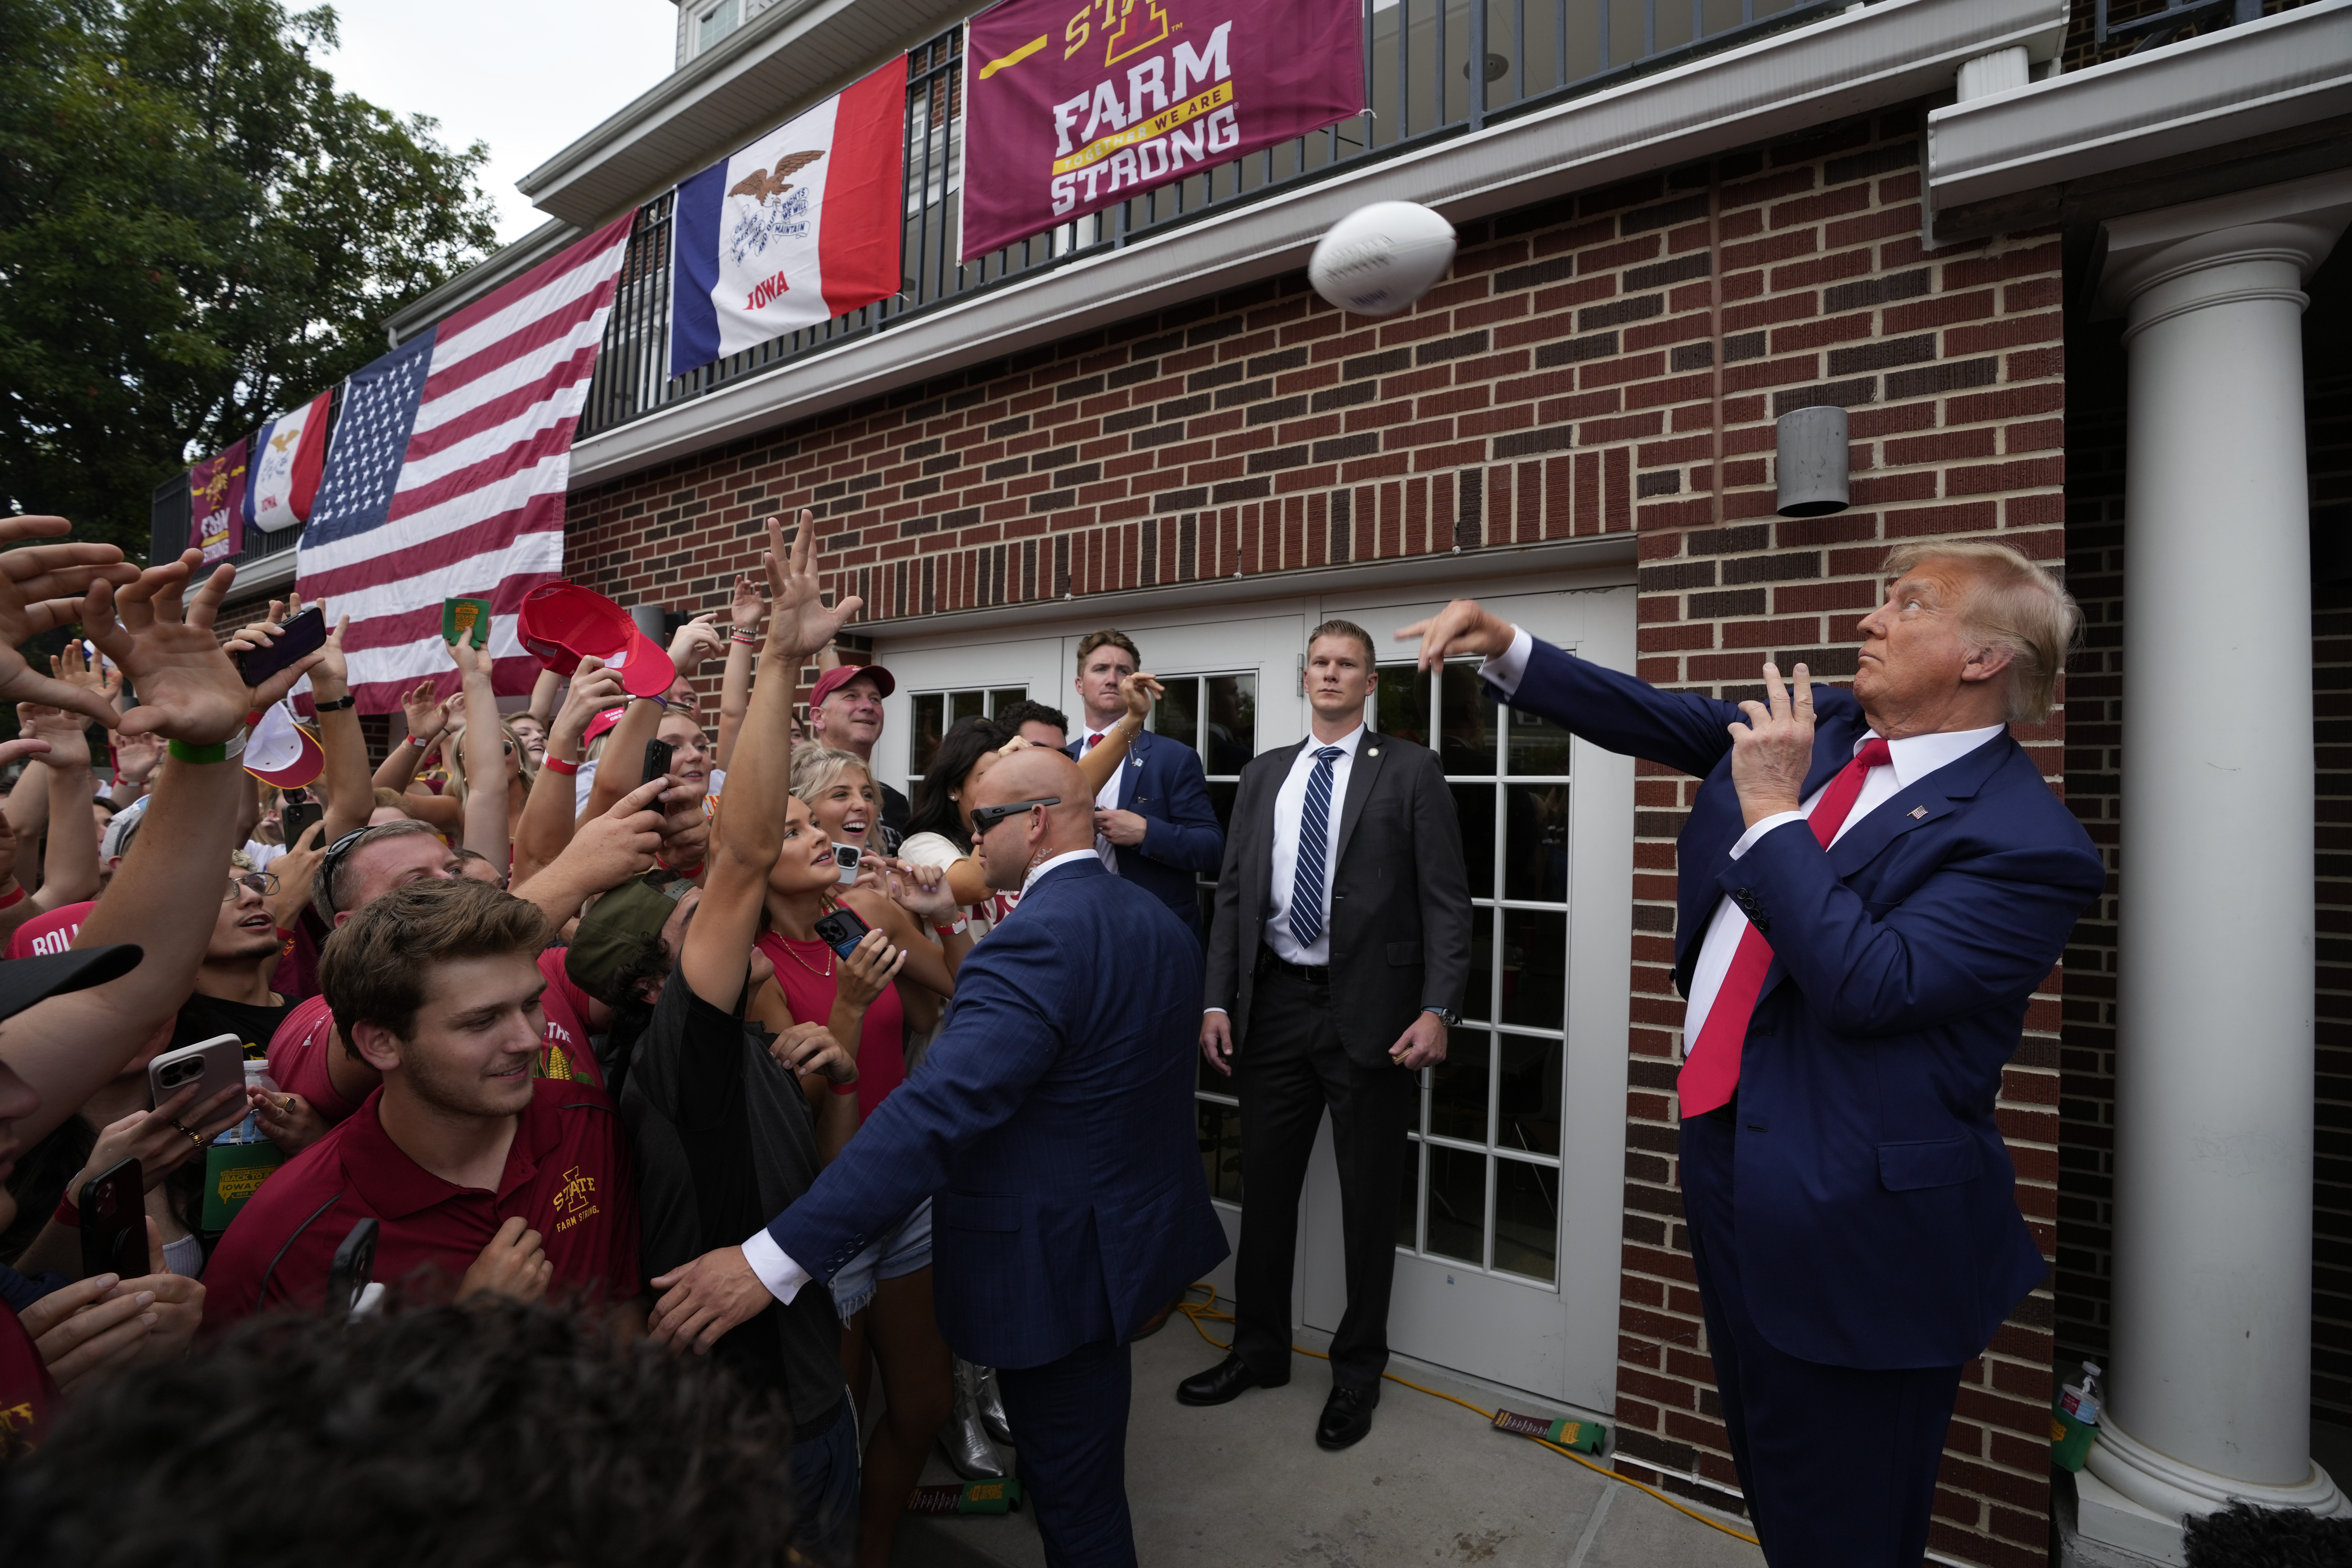 Trump stops at a fraternity house on his way to Iowa-Iowa State football game, outdrawing his rivals pic